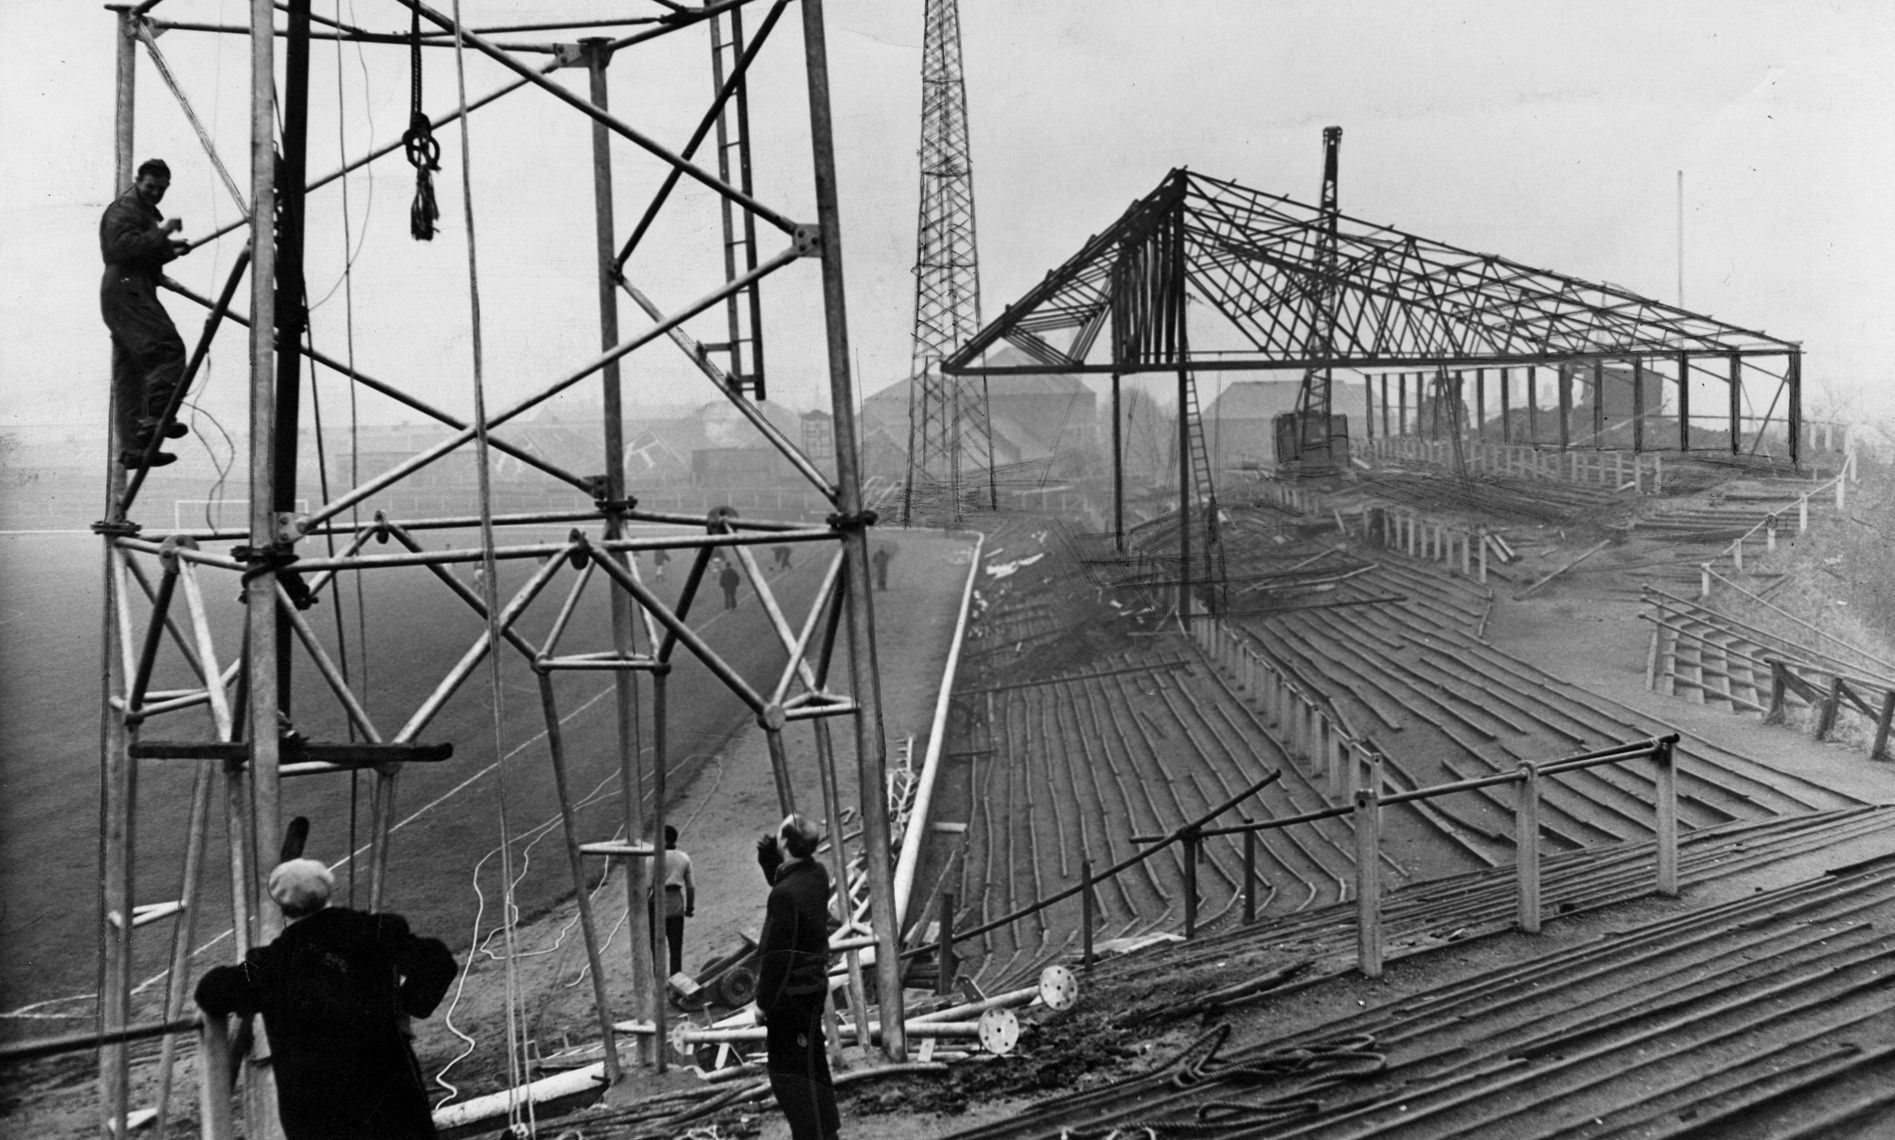 December 1959: Pylons being erected at Dens Park, 60 years after the move from Carolina Port.